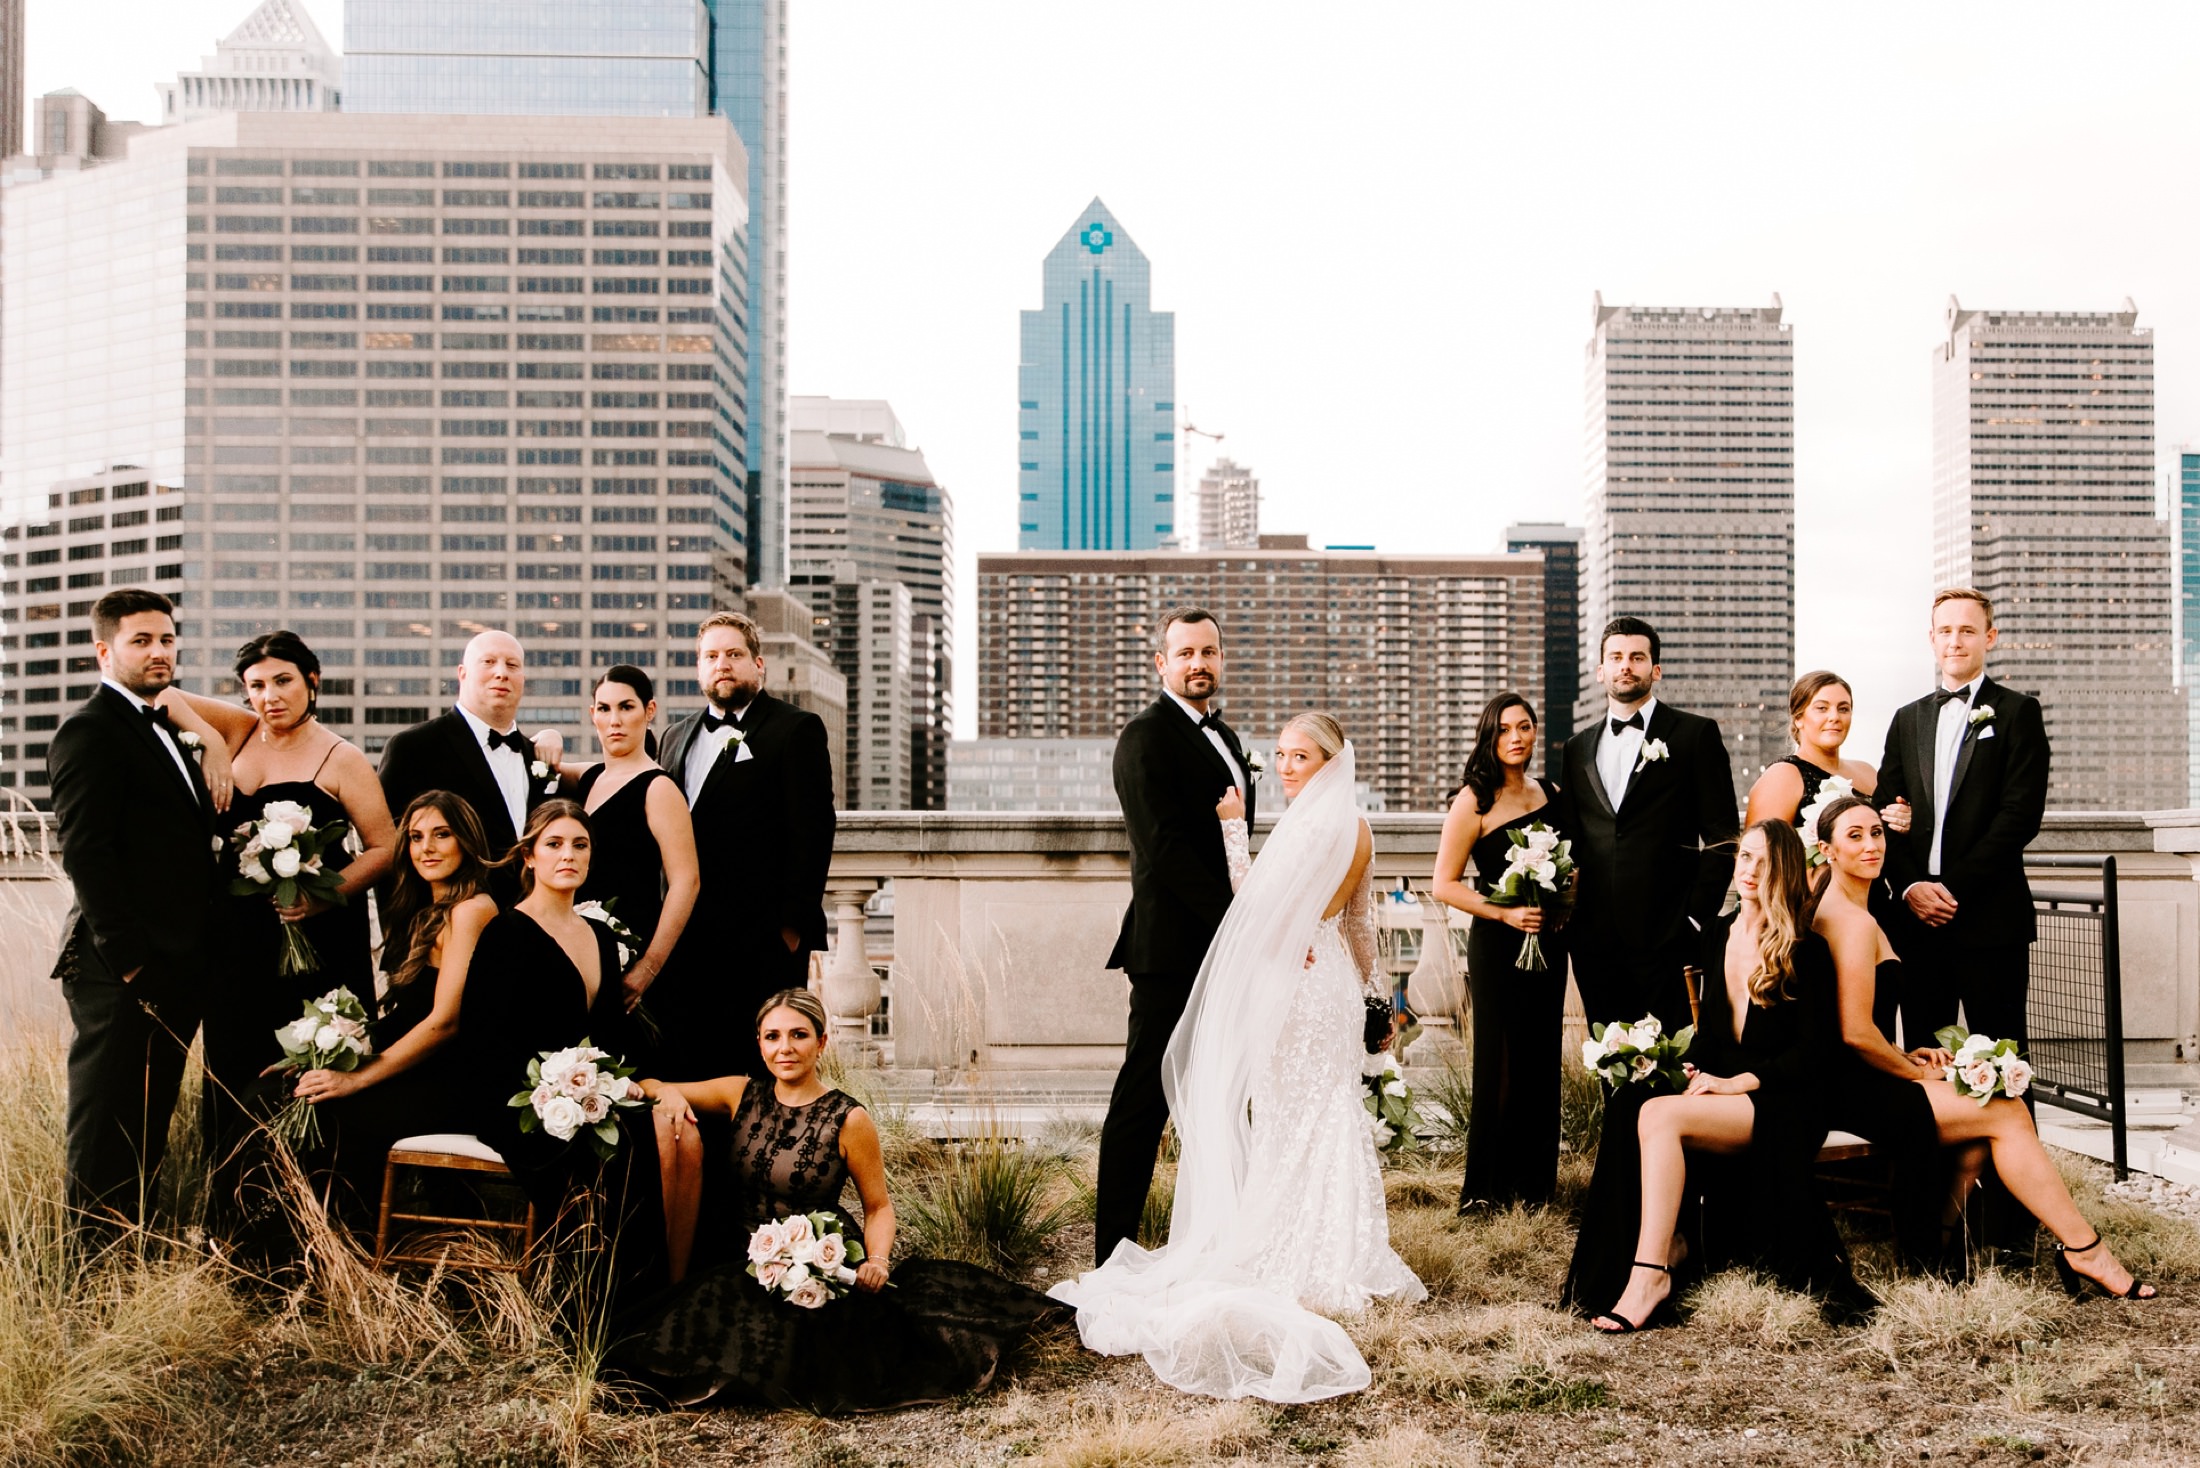 A Glam Philly Wedding at Free Library of Philadelphia